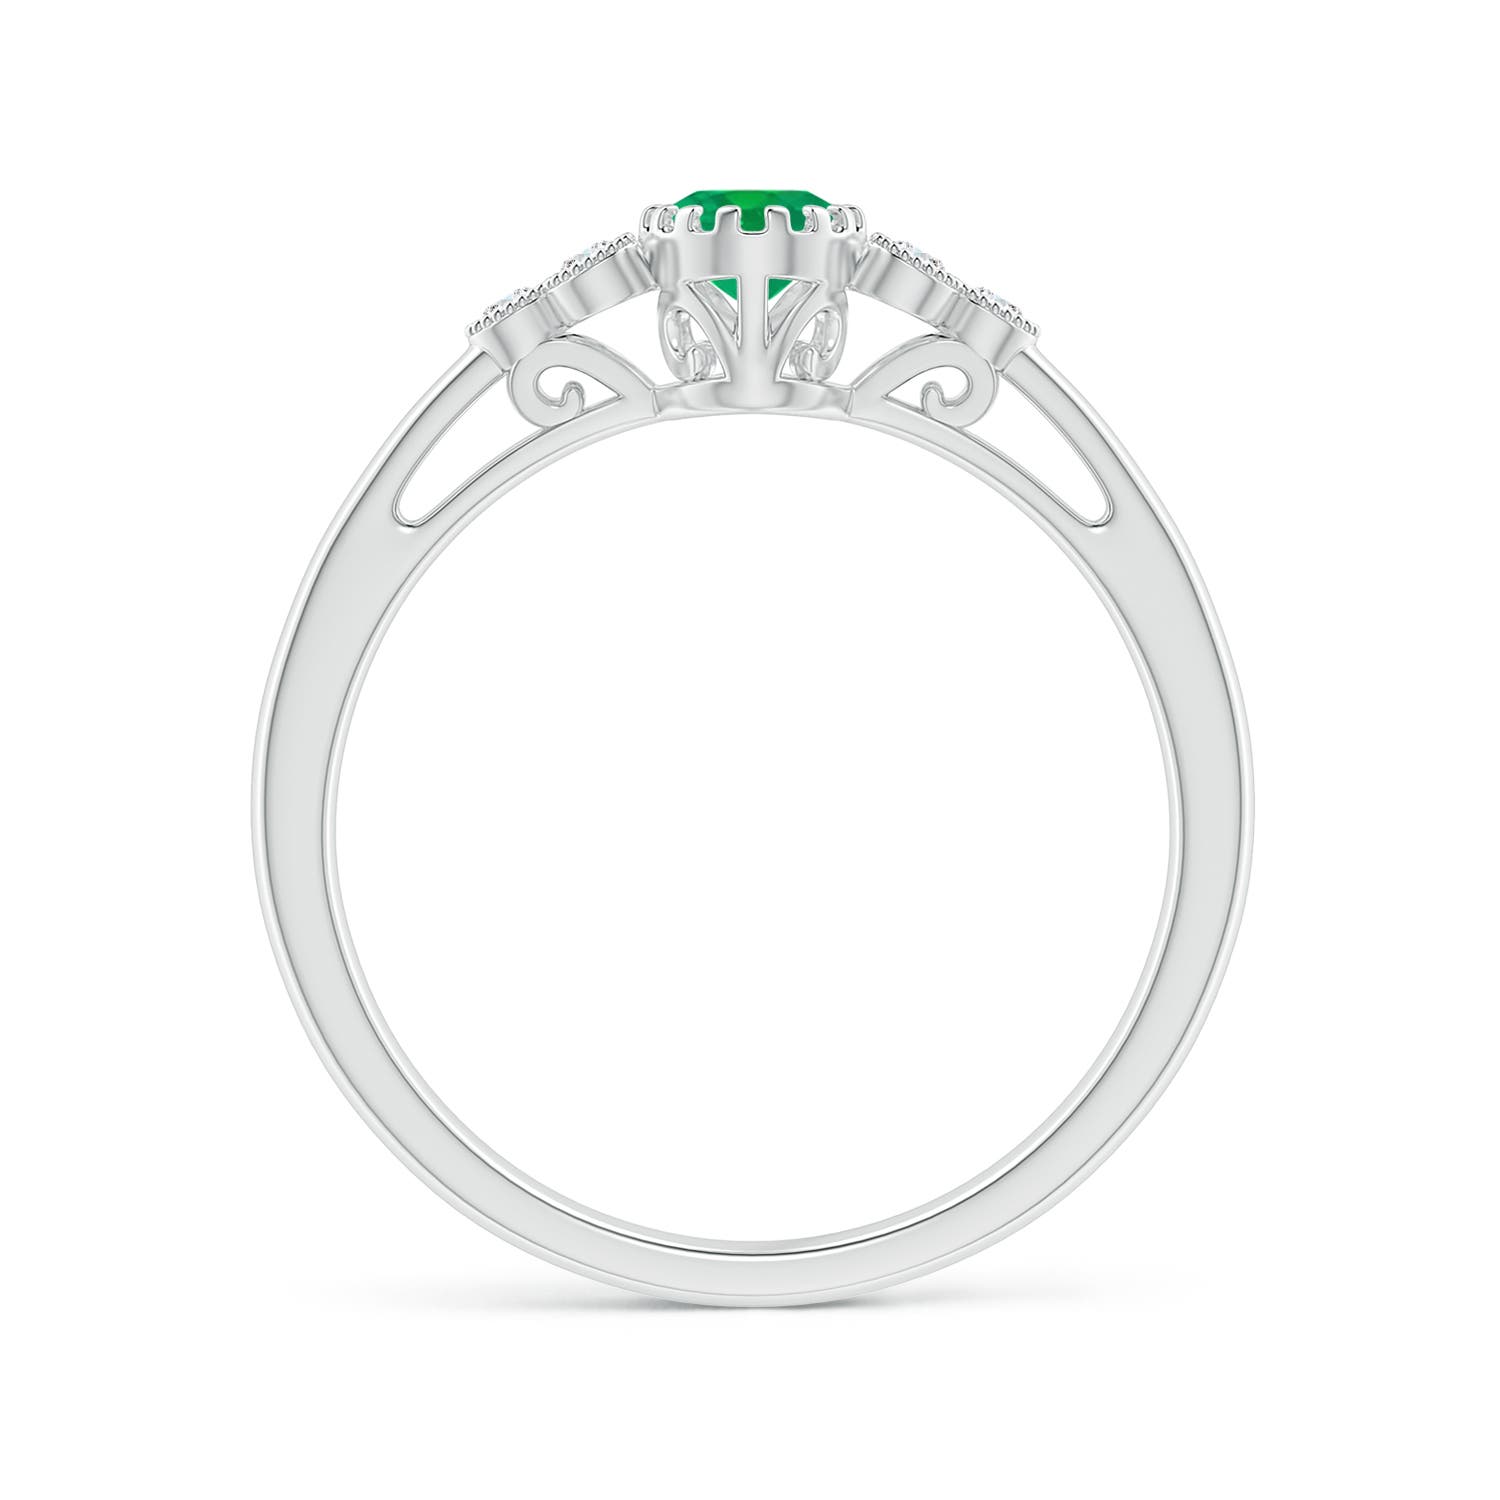 AA - Emerald / 0.48 CT / 14 KT White Gold